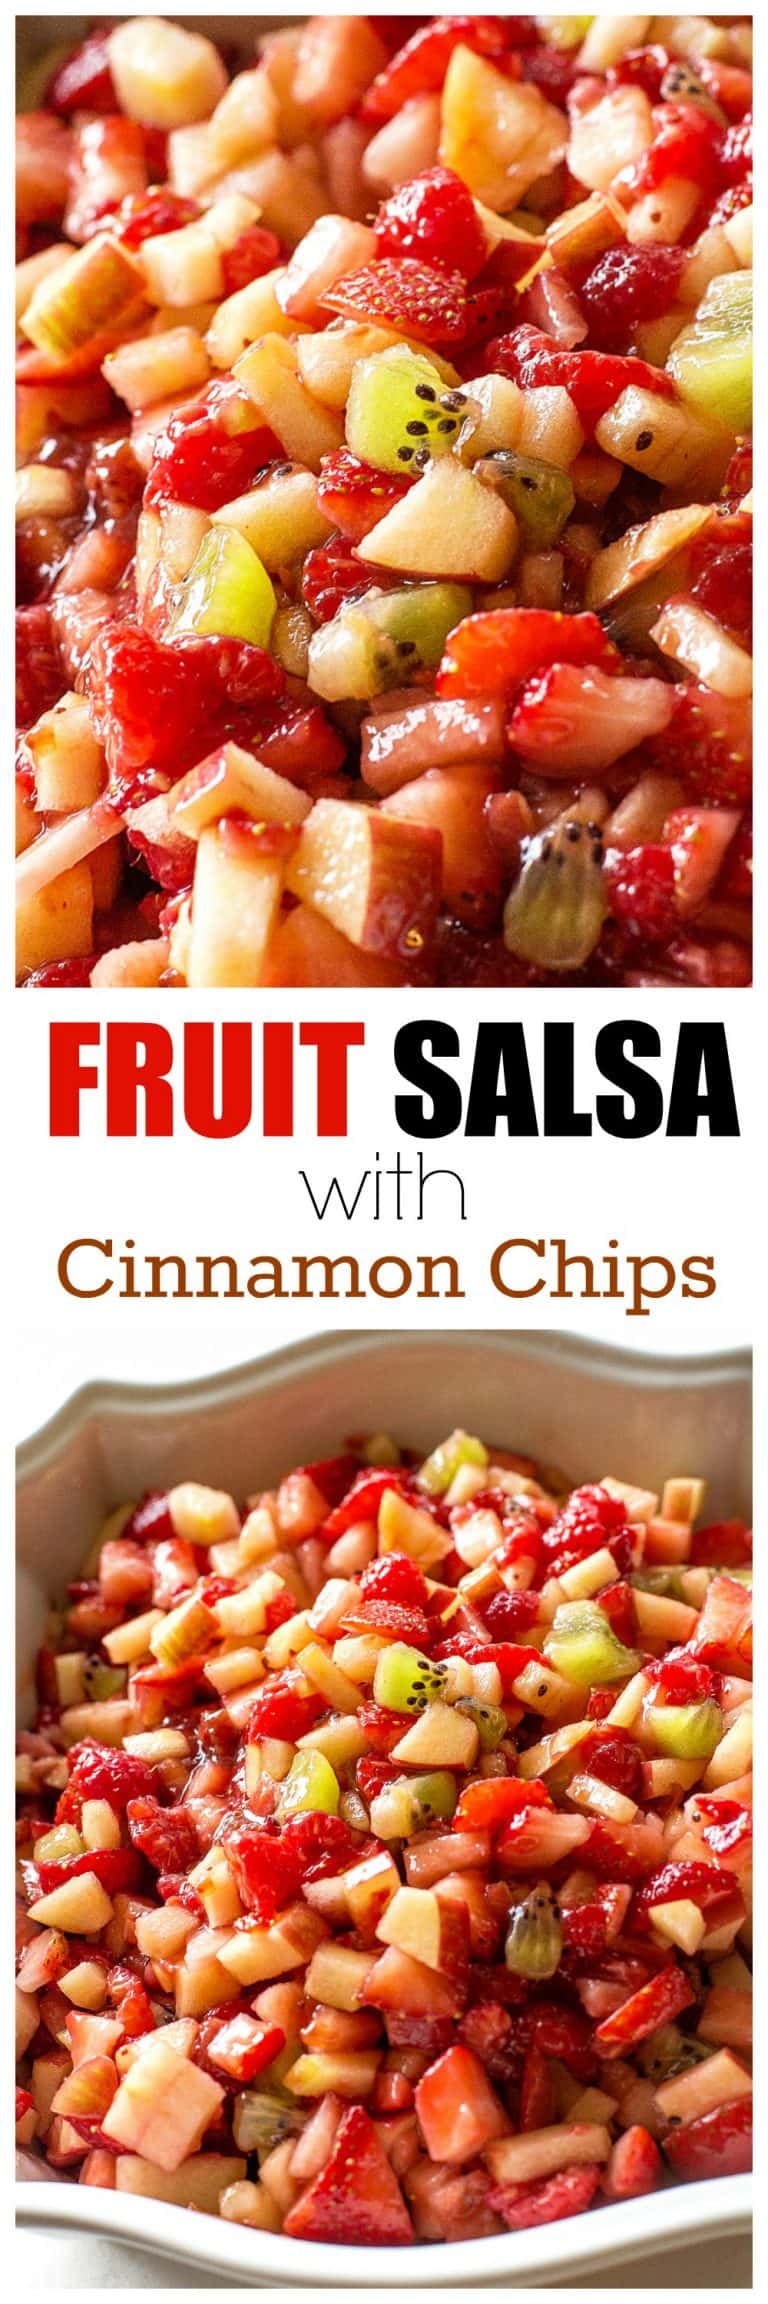 Fruit Salsa With Baked Cinnamon Chips - The Girl Who Ate Everything